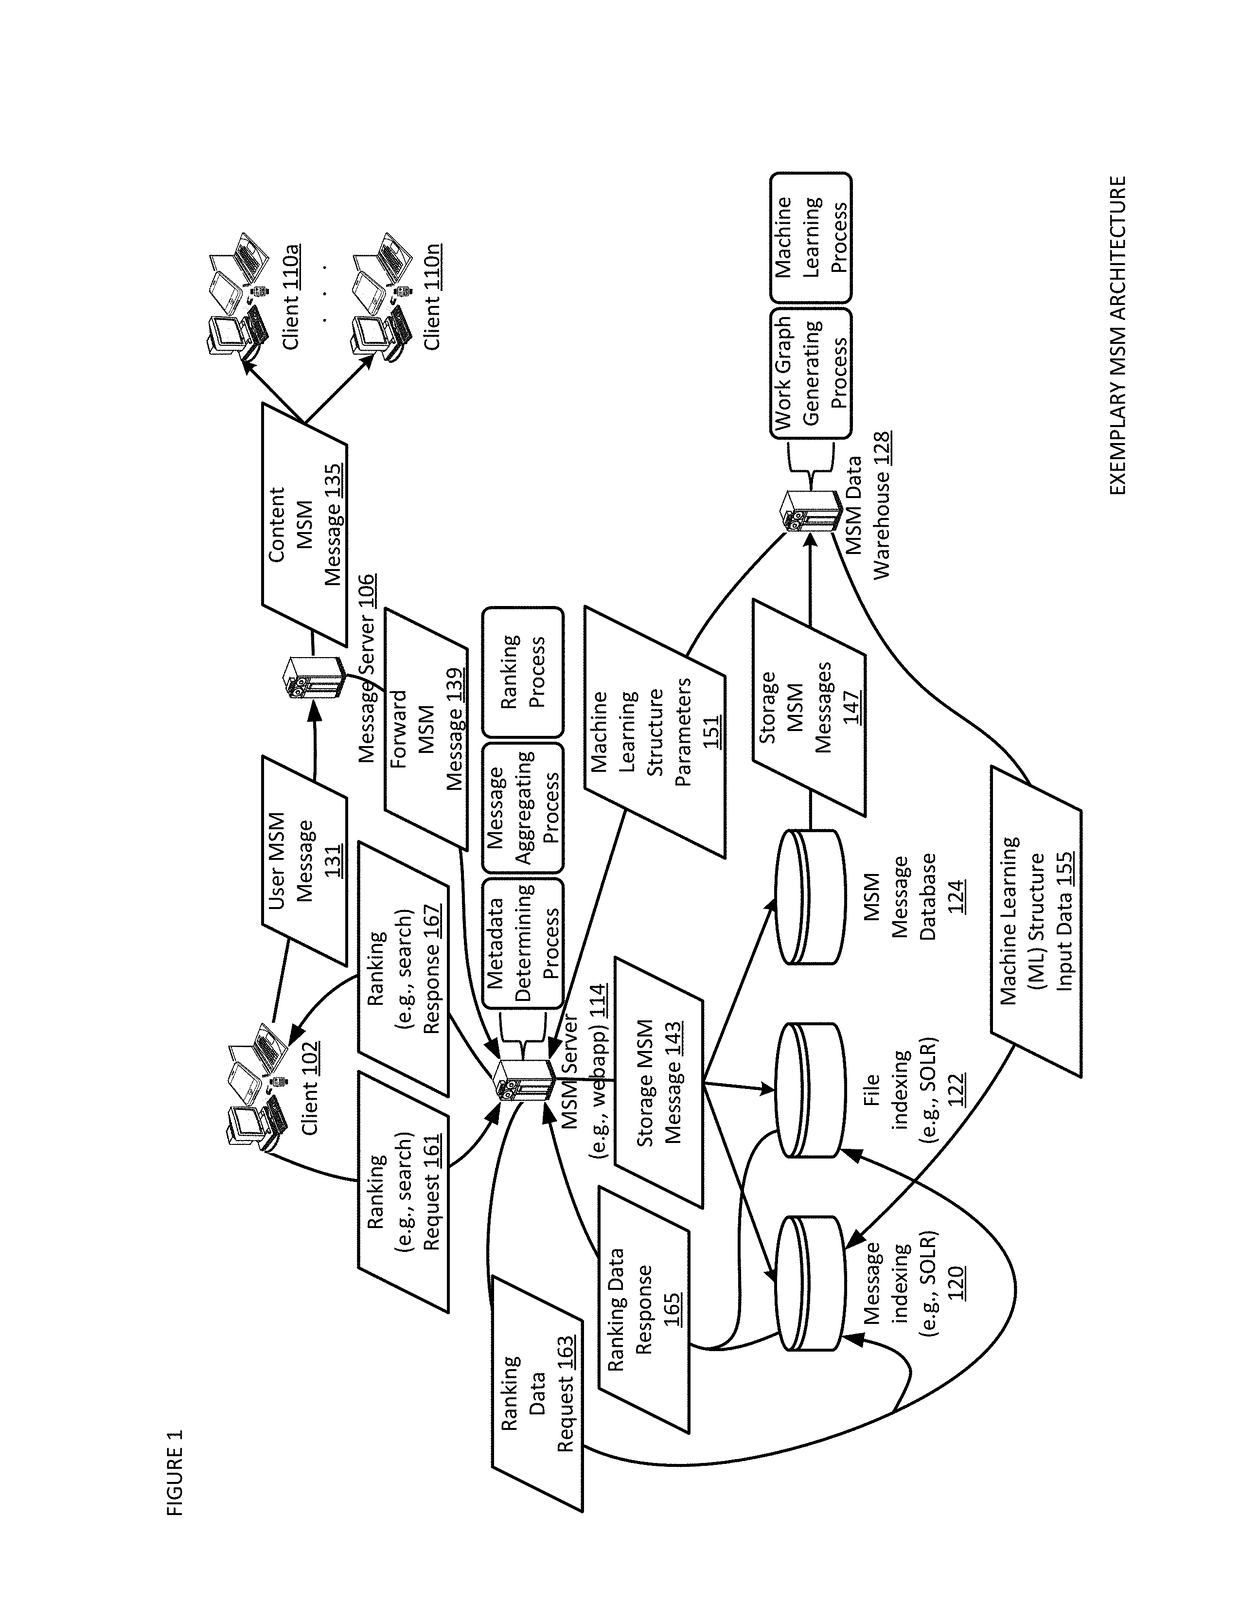 Messaging search and management apparatuses, methods and systems